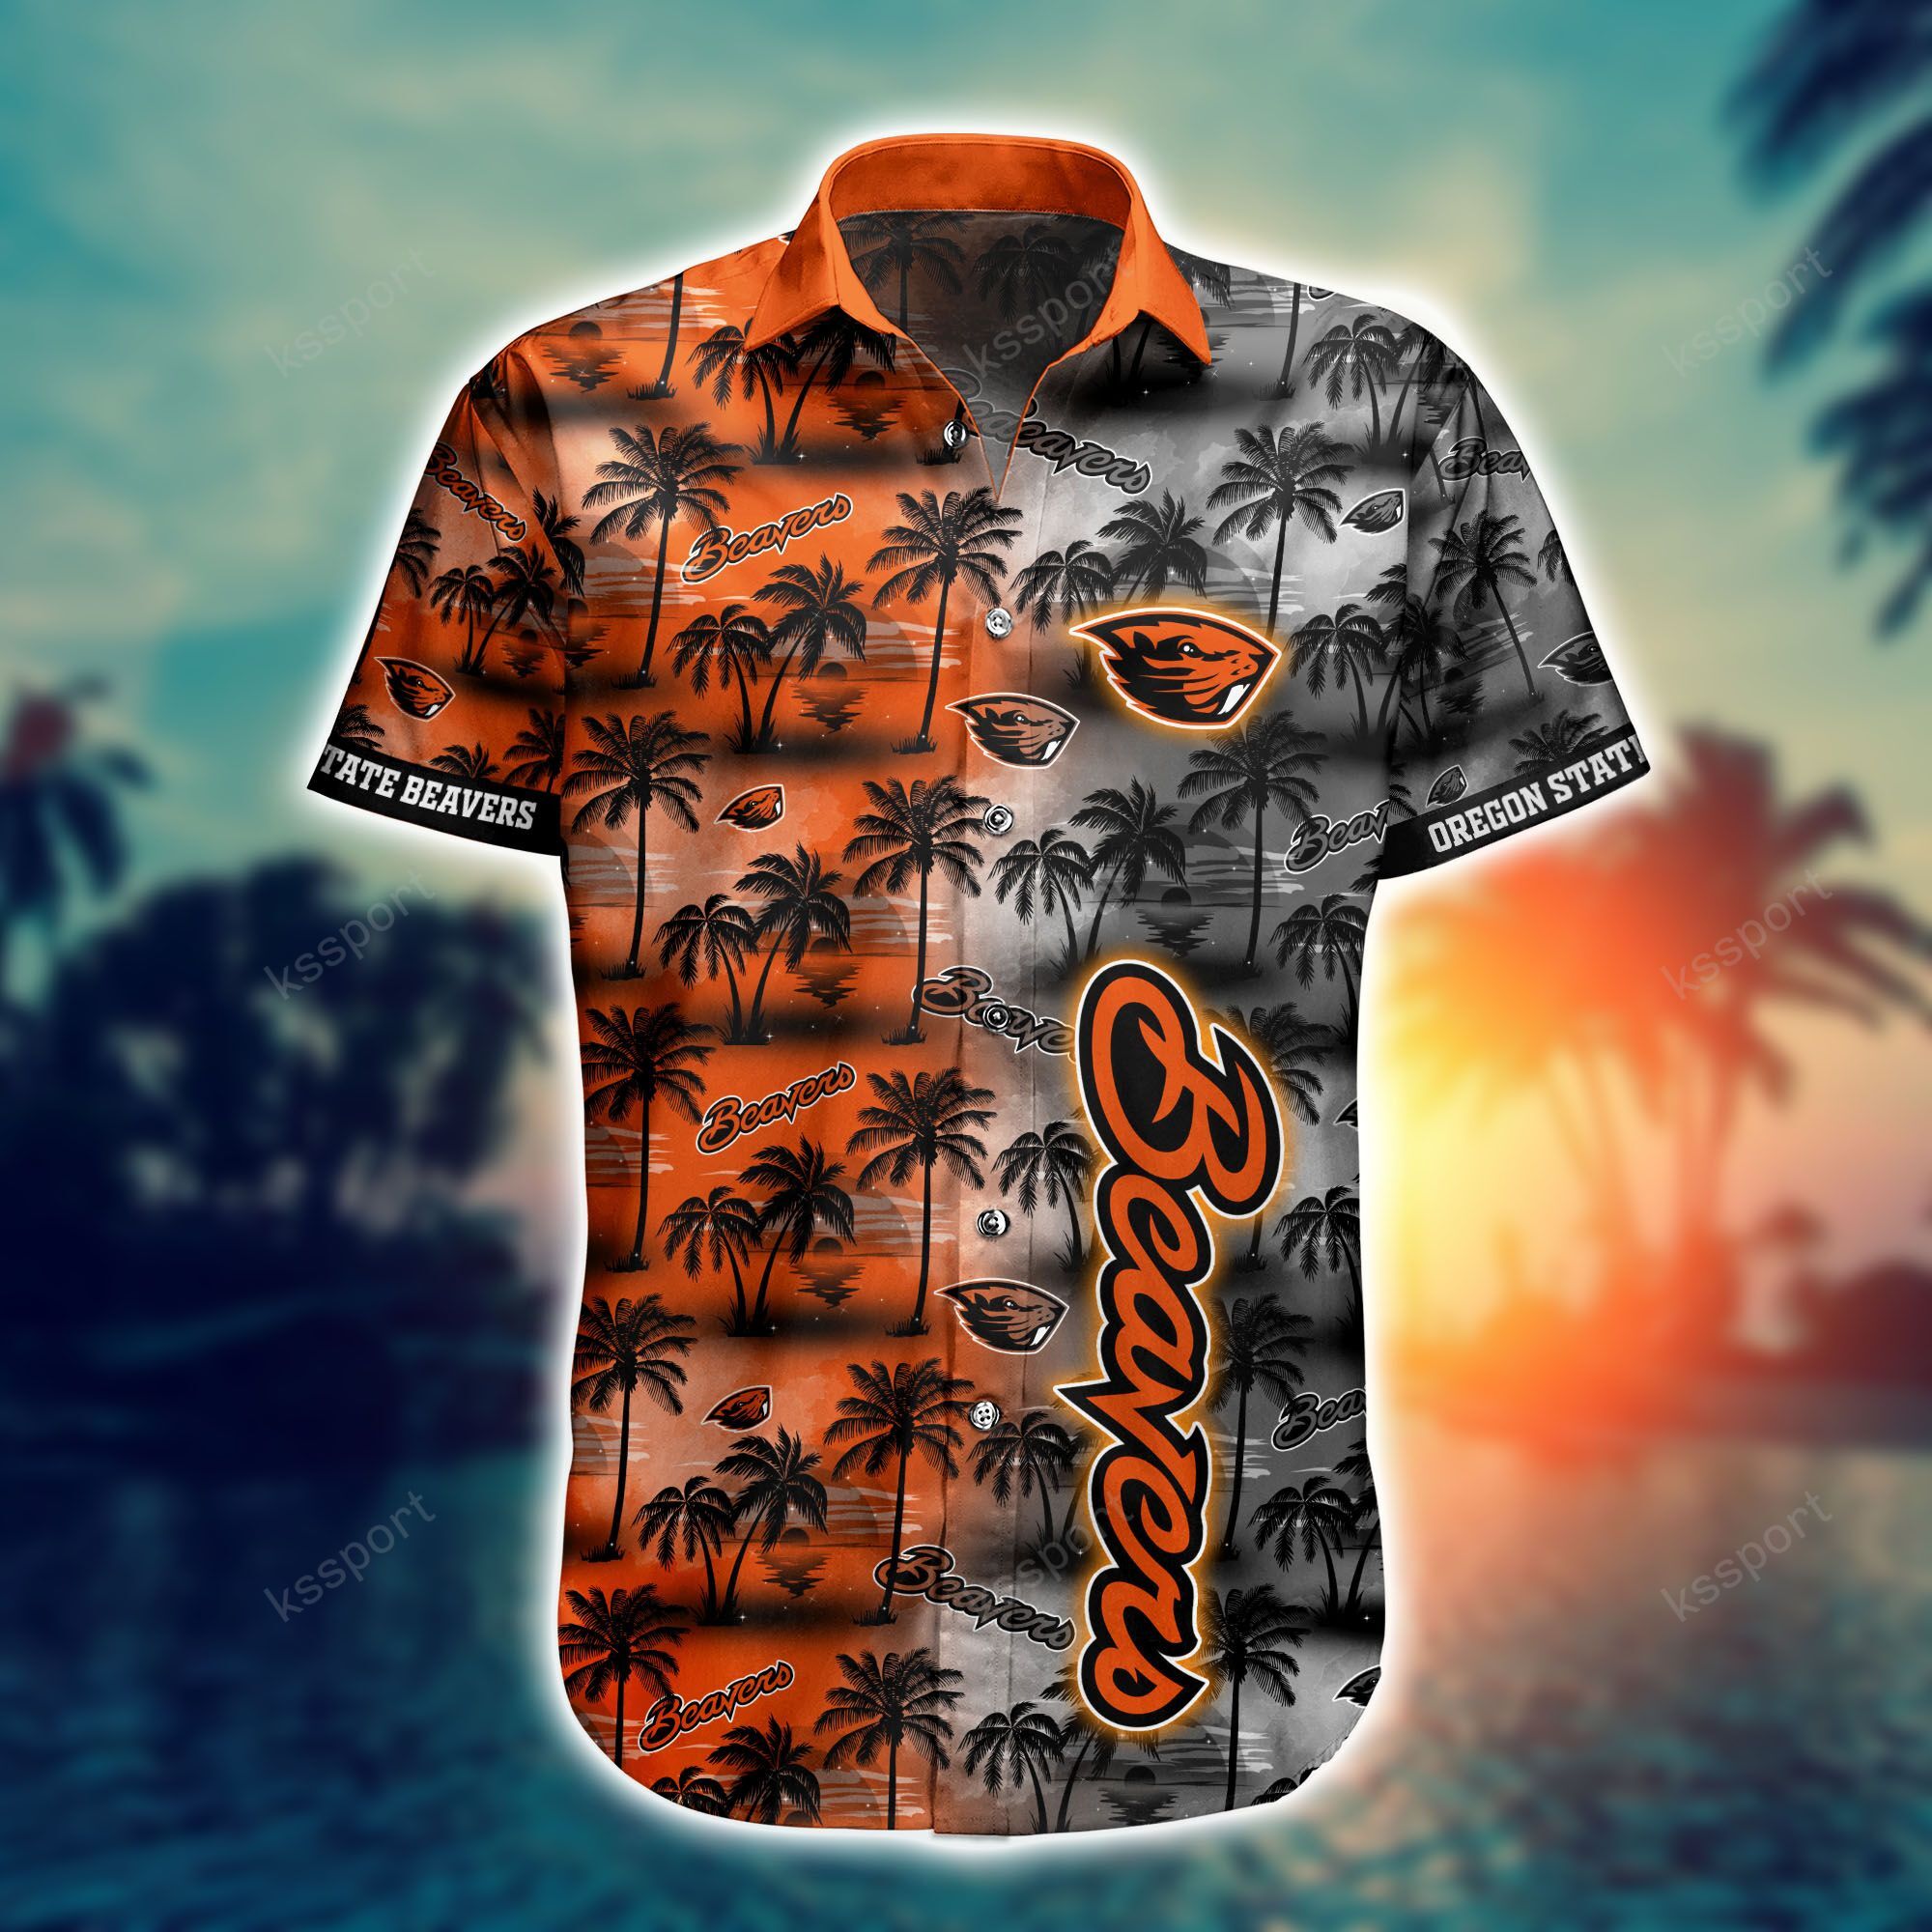 Top cool Hawaiian shirt 2022 - Make sure you get yours today before they run out! 165